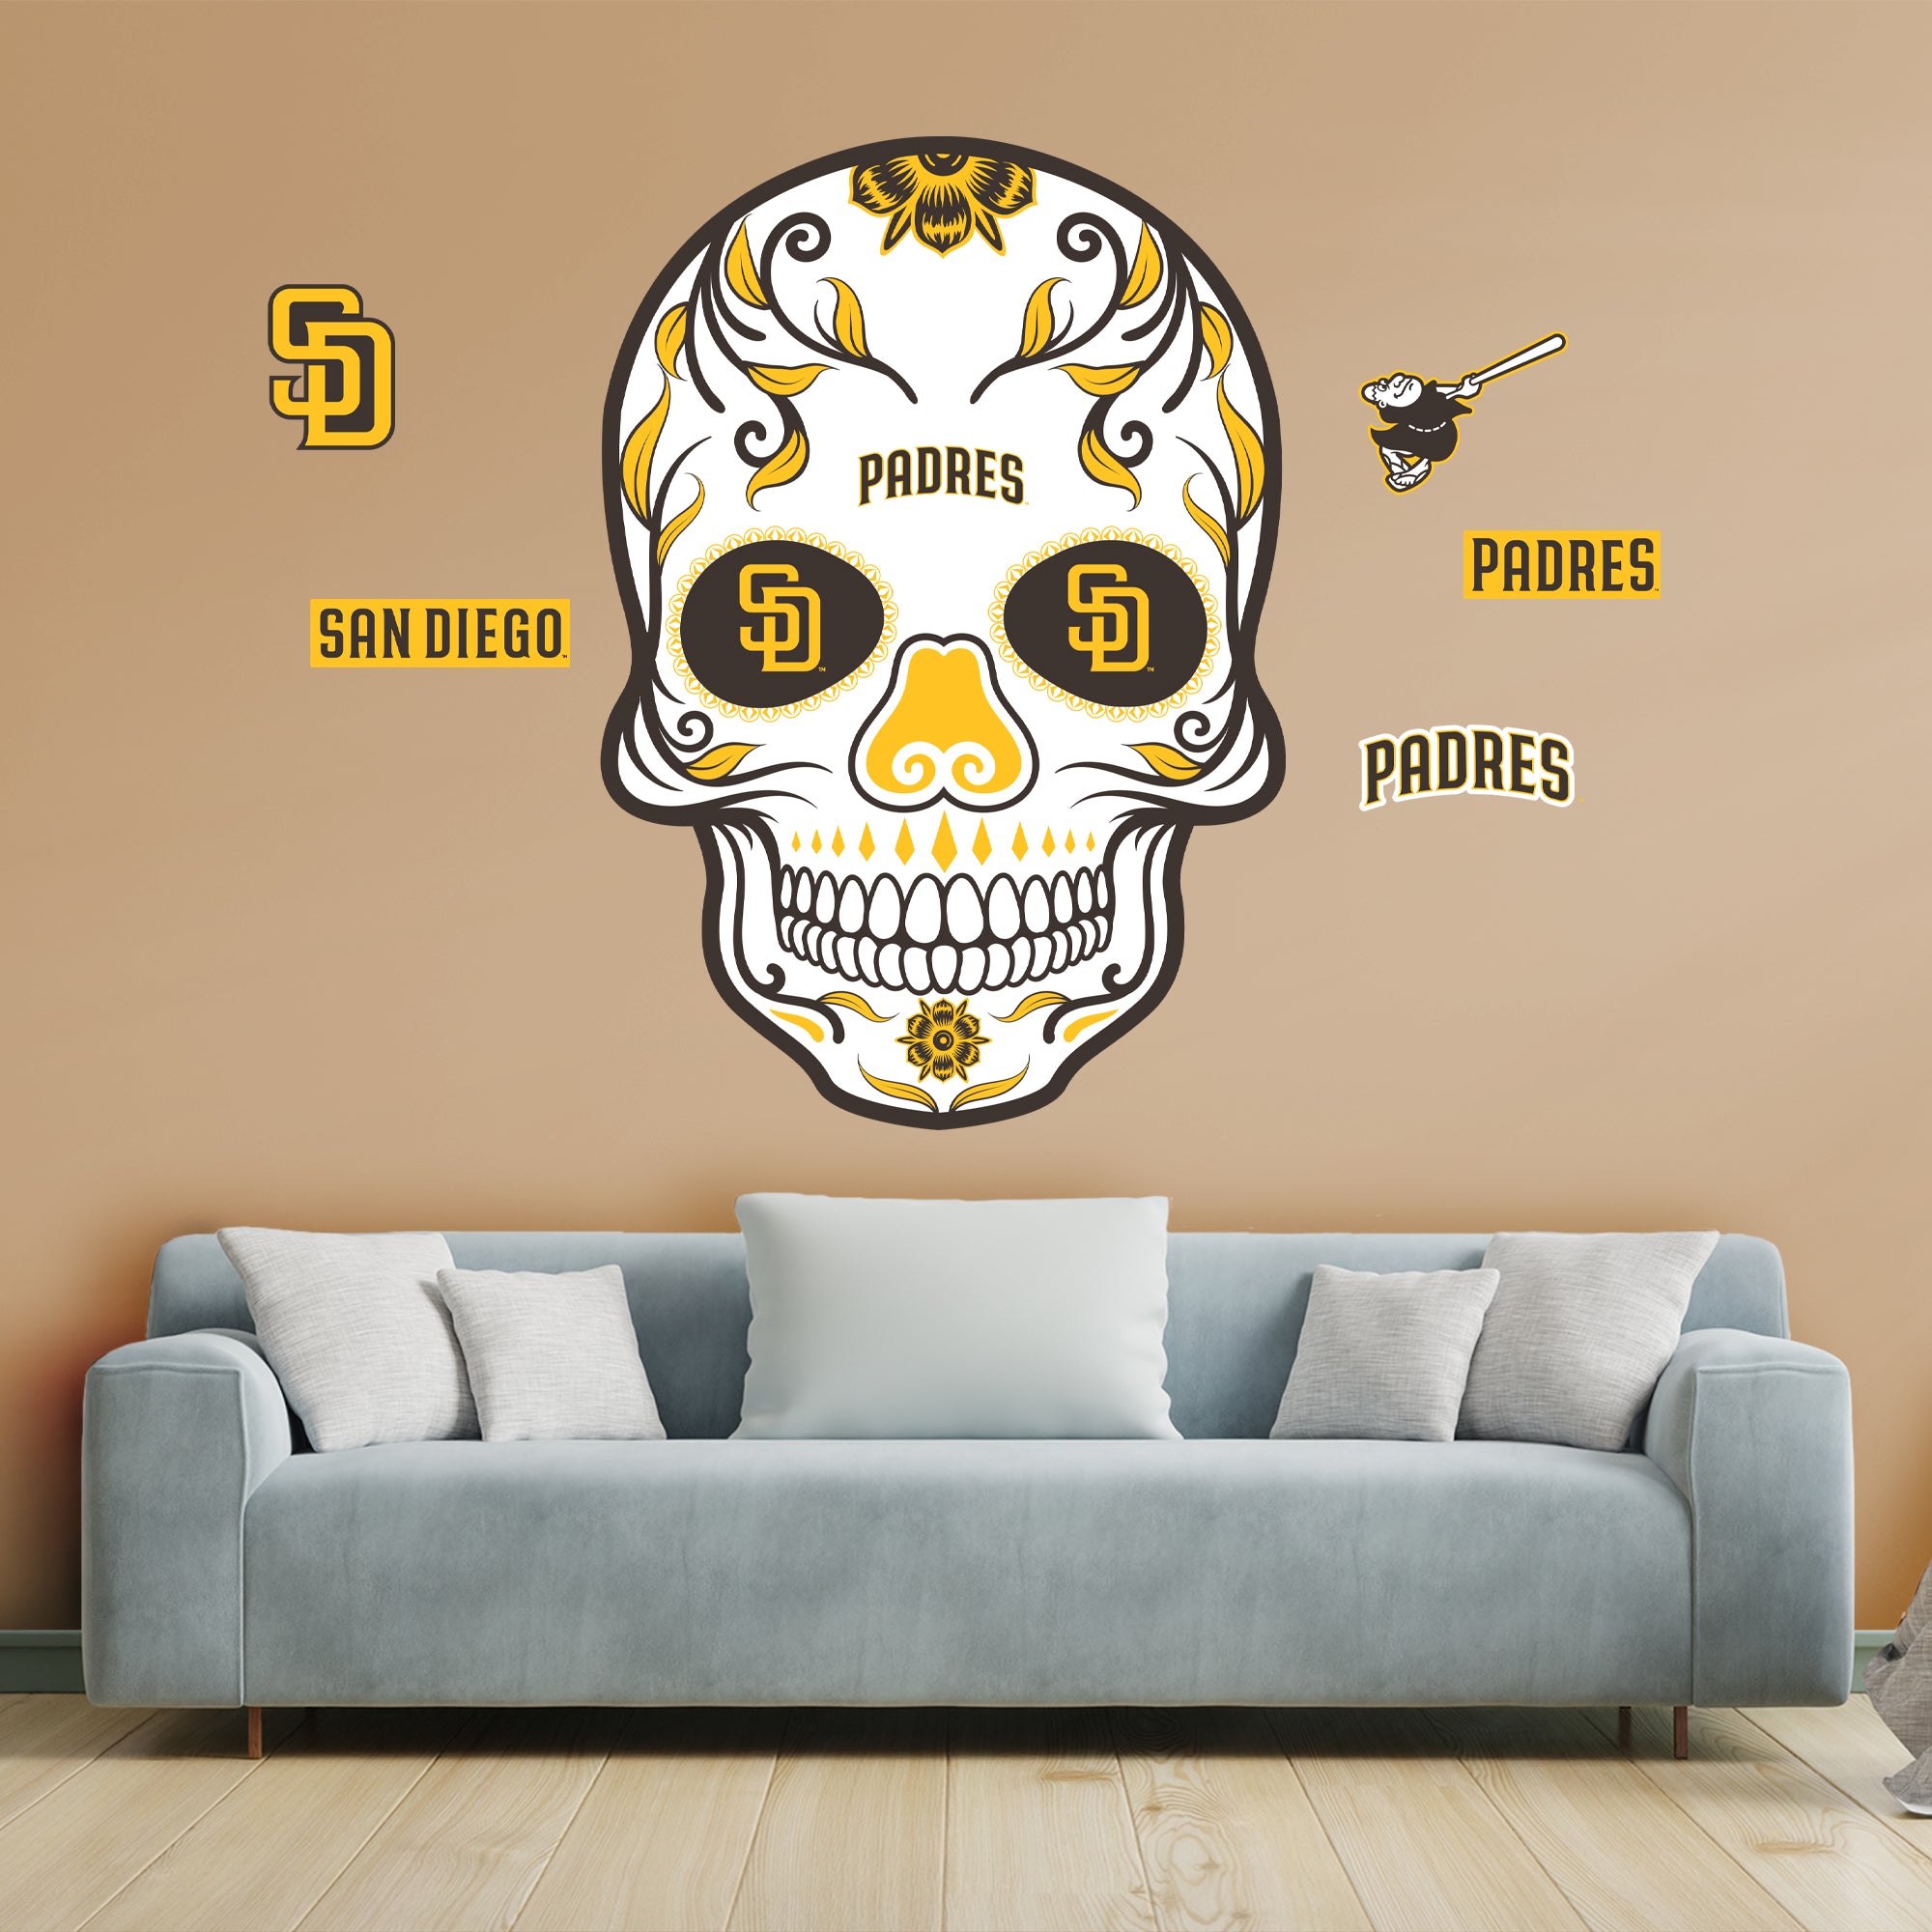 San Diego Padres Retro Vintage Throwback Banner and Tapestry Wall Tack Pads